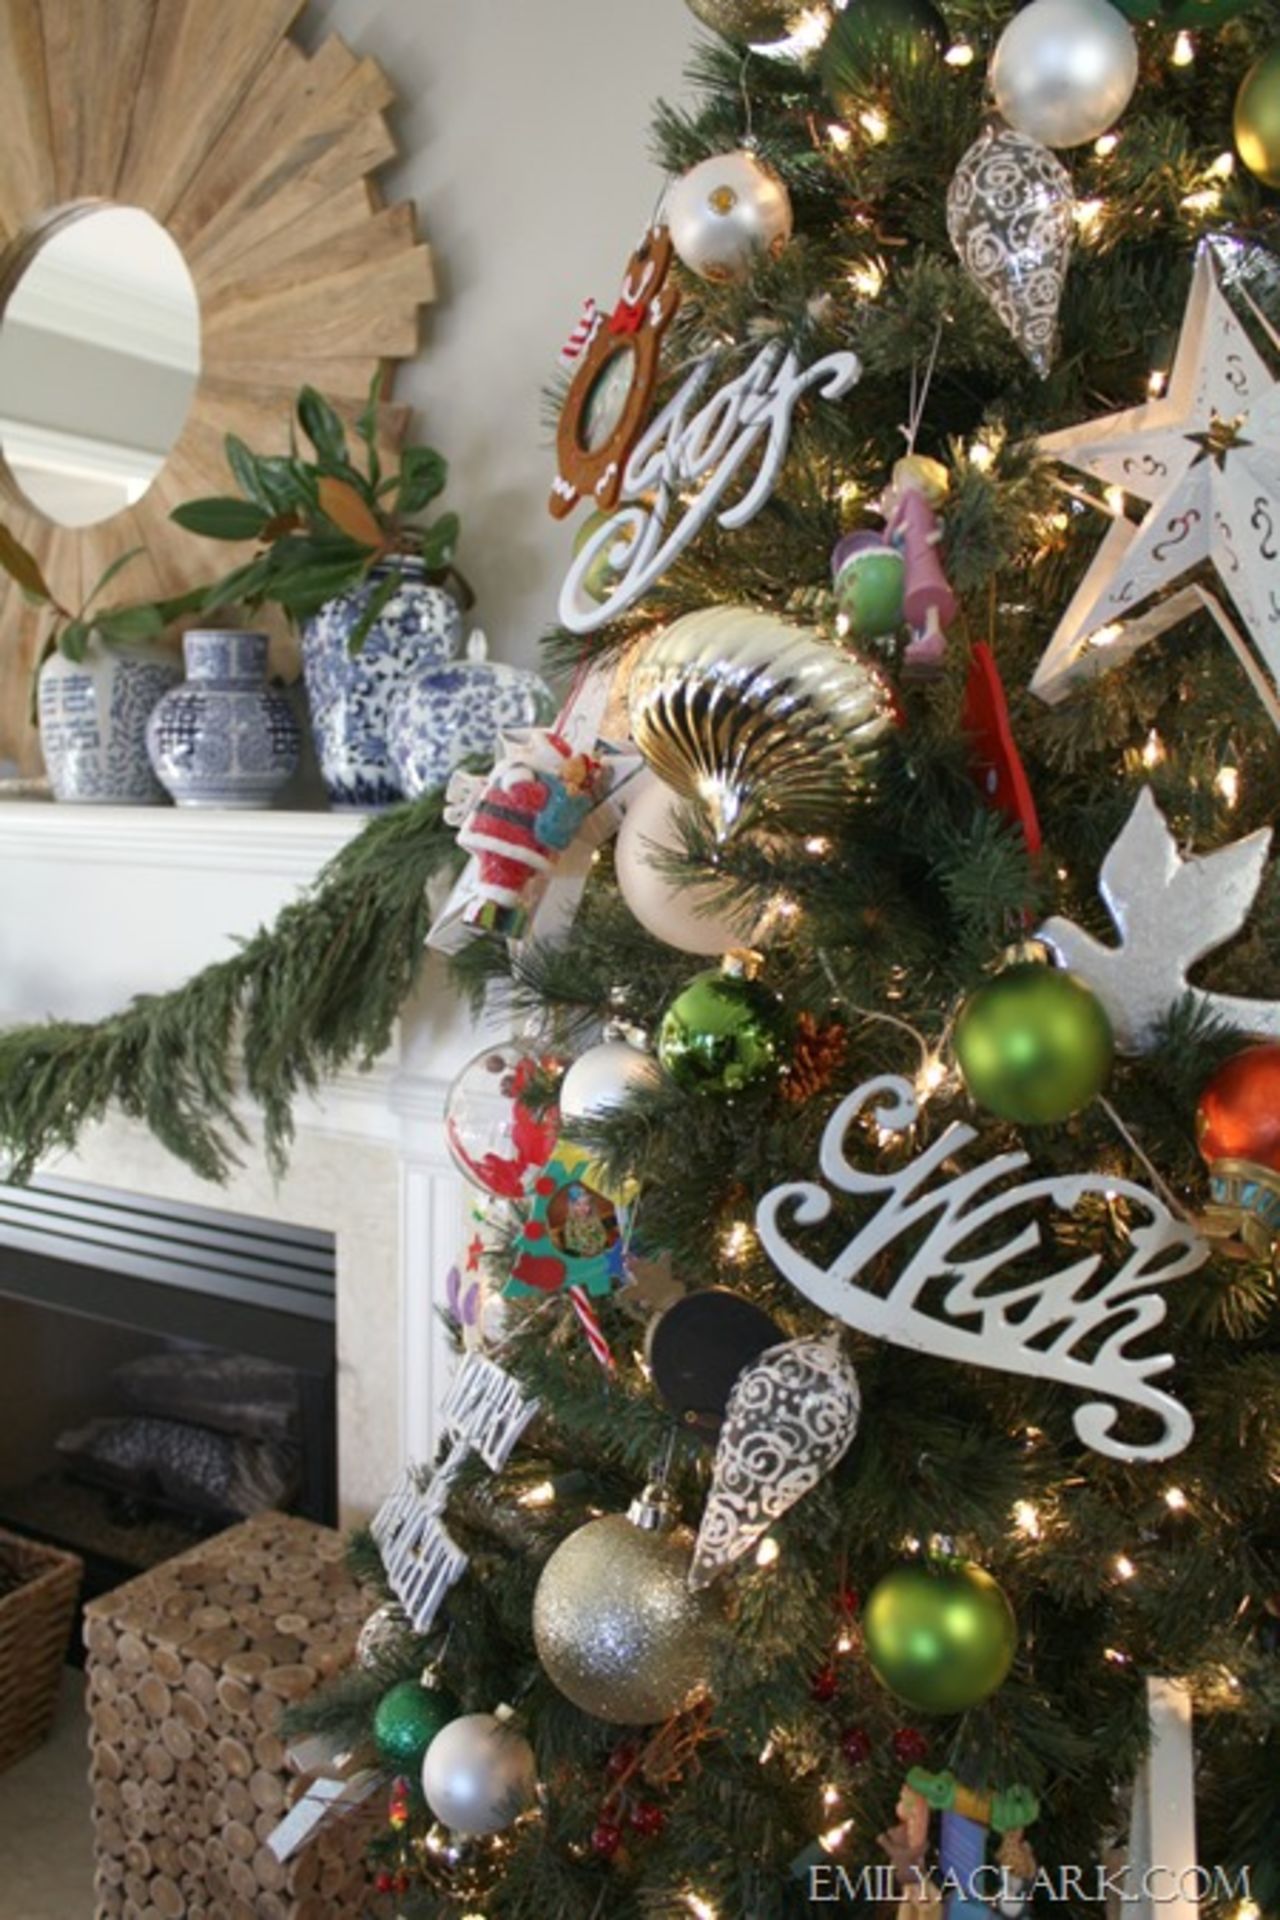 Clark's Christmas tree incorporates favorite family ornaments as well as a simplistic take on woodland botanicals.